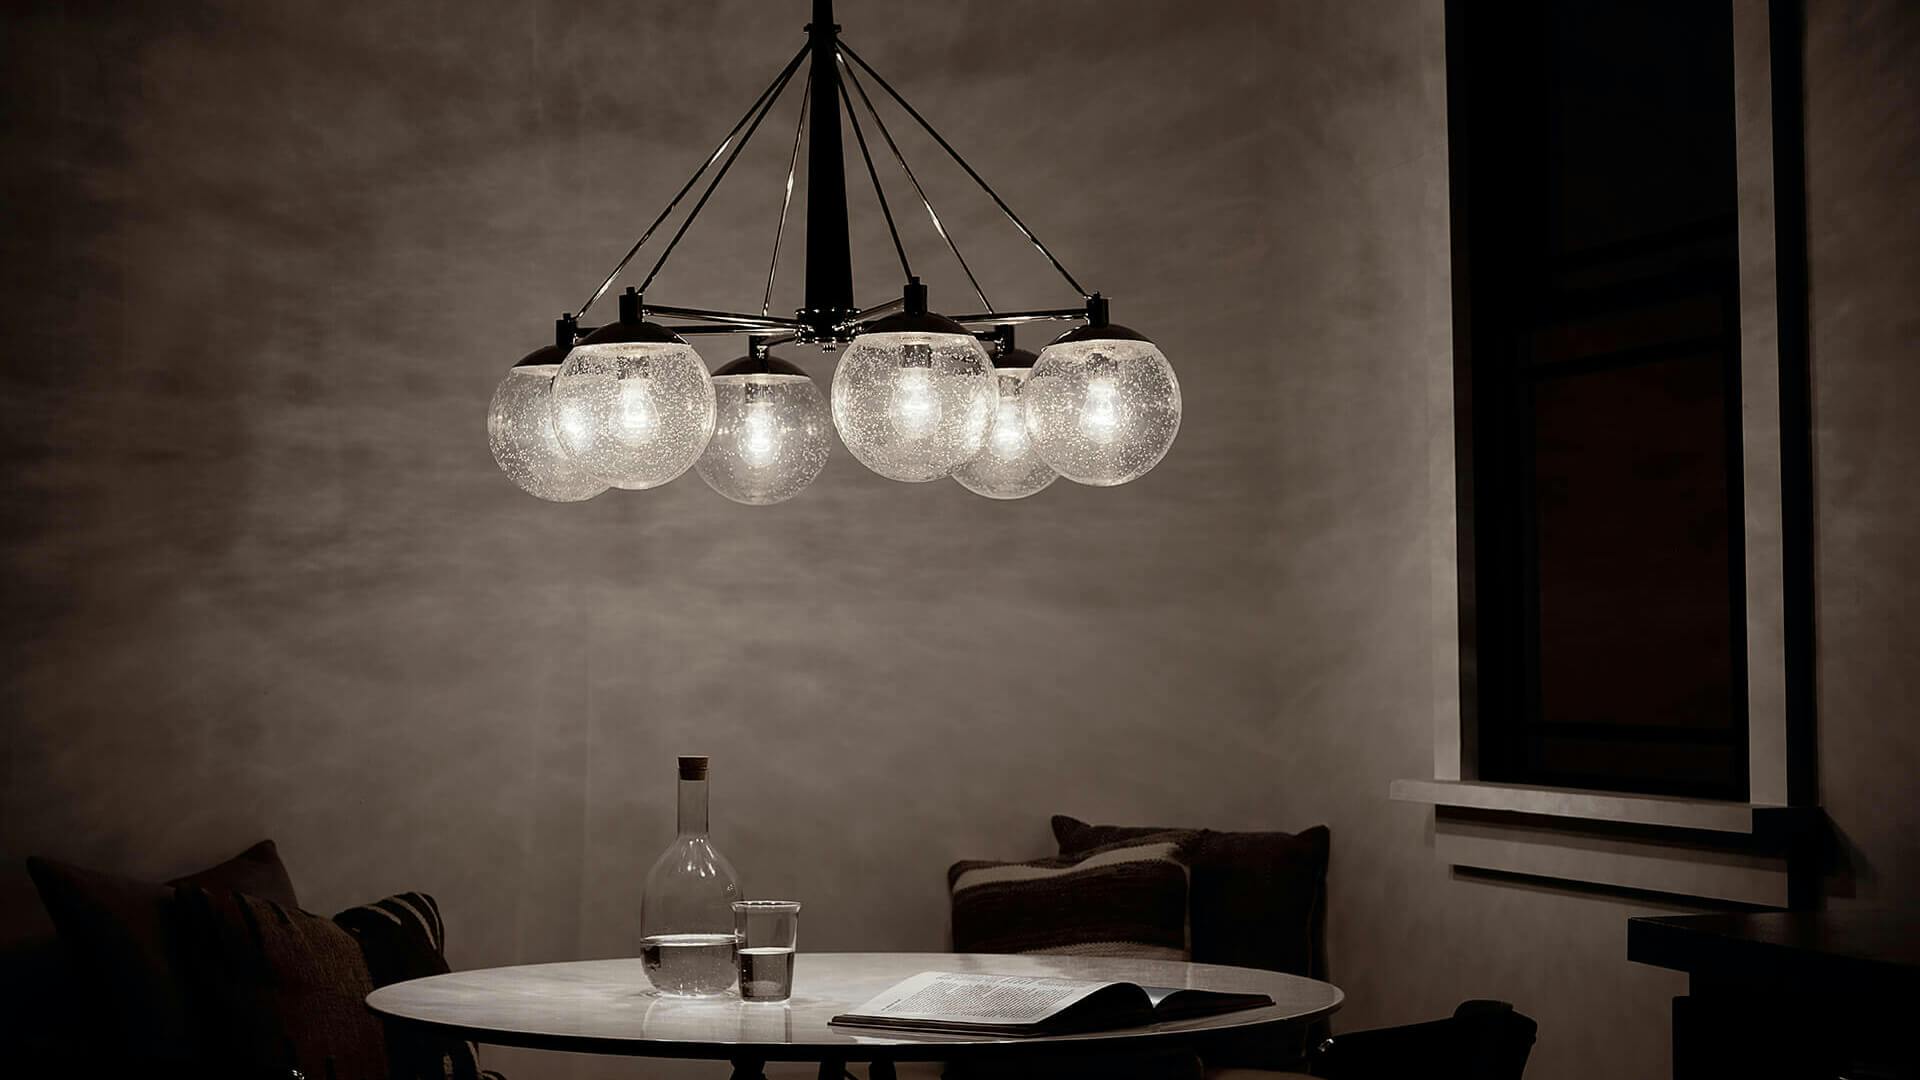 Dining table in a dark grey corner of the kitchen, an illuminated Marilyn chandelier hangs above the able